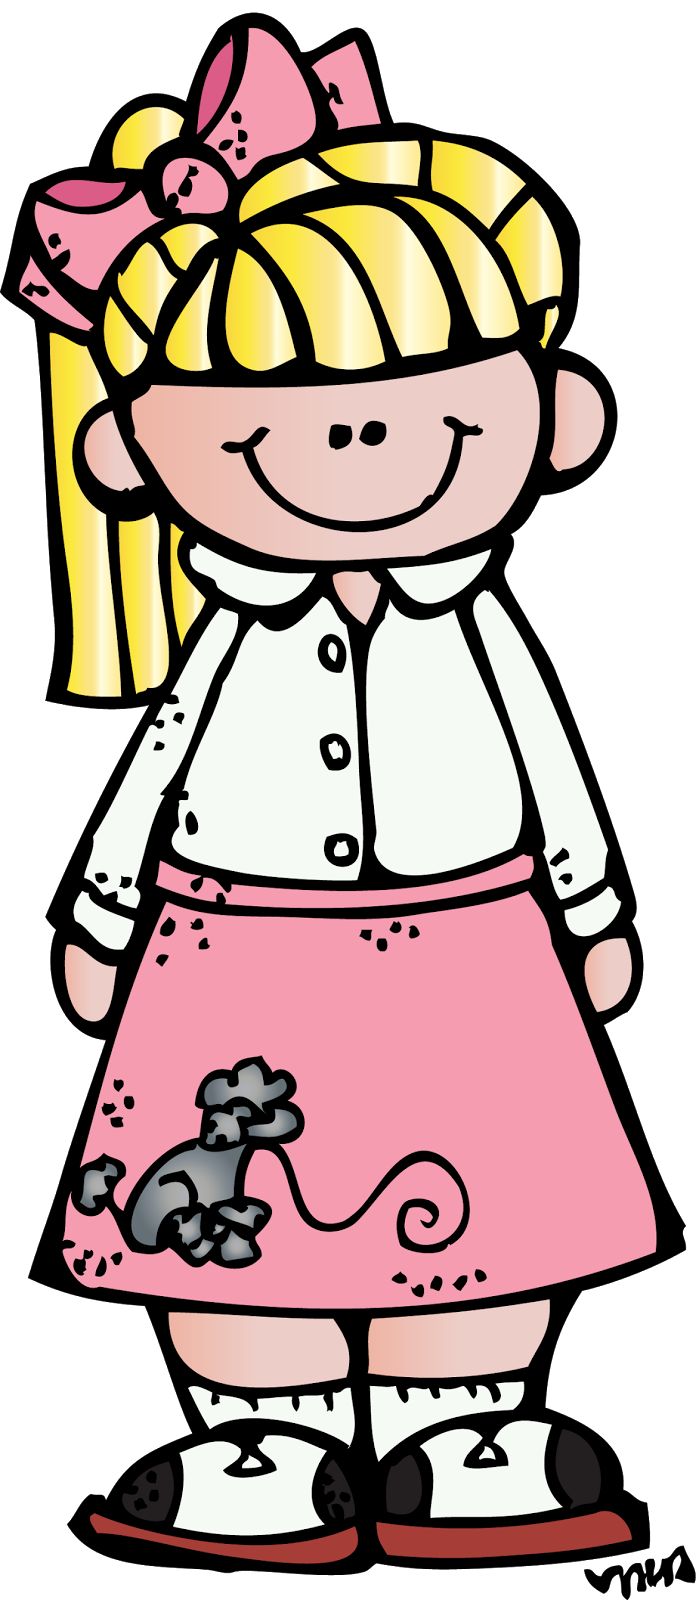 50s clipart day.